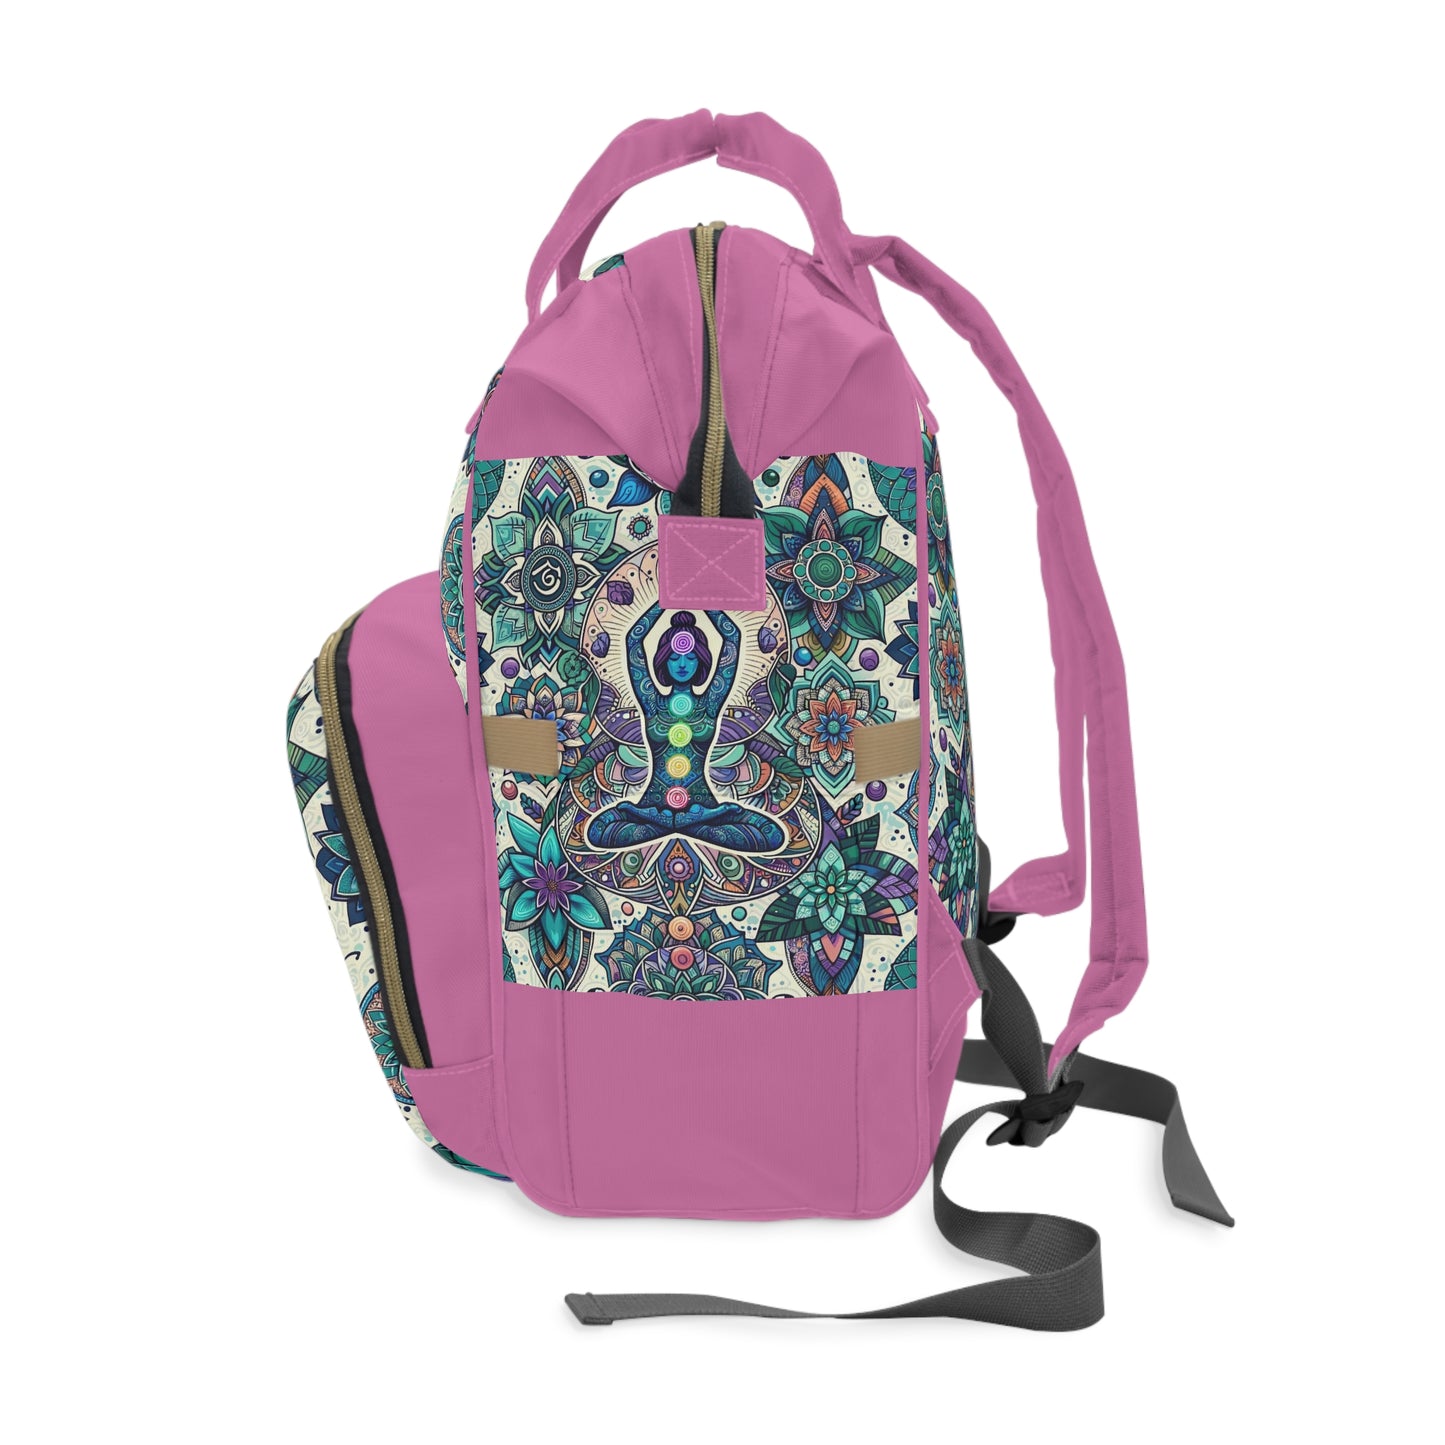 -Multifunctional Diaper Backpack with Serene Meditation and Flower of Life Design